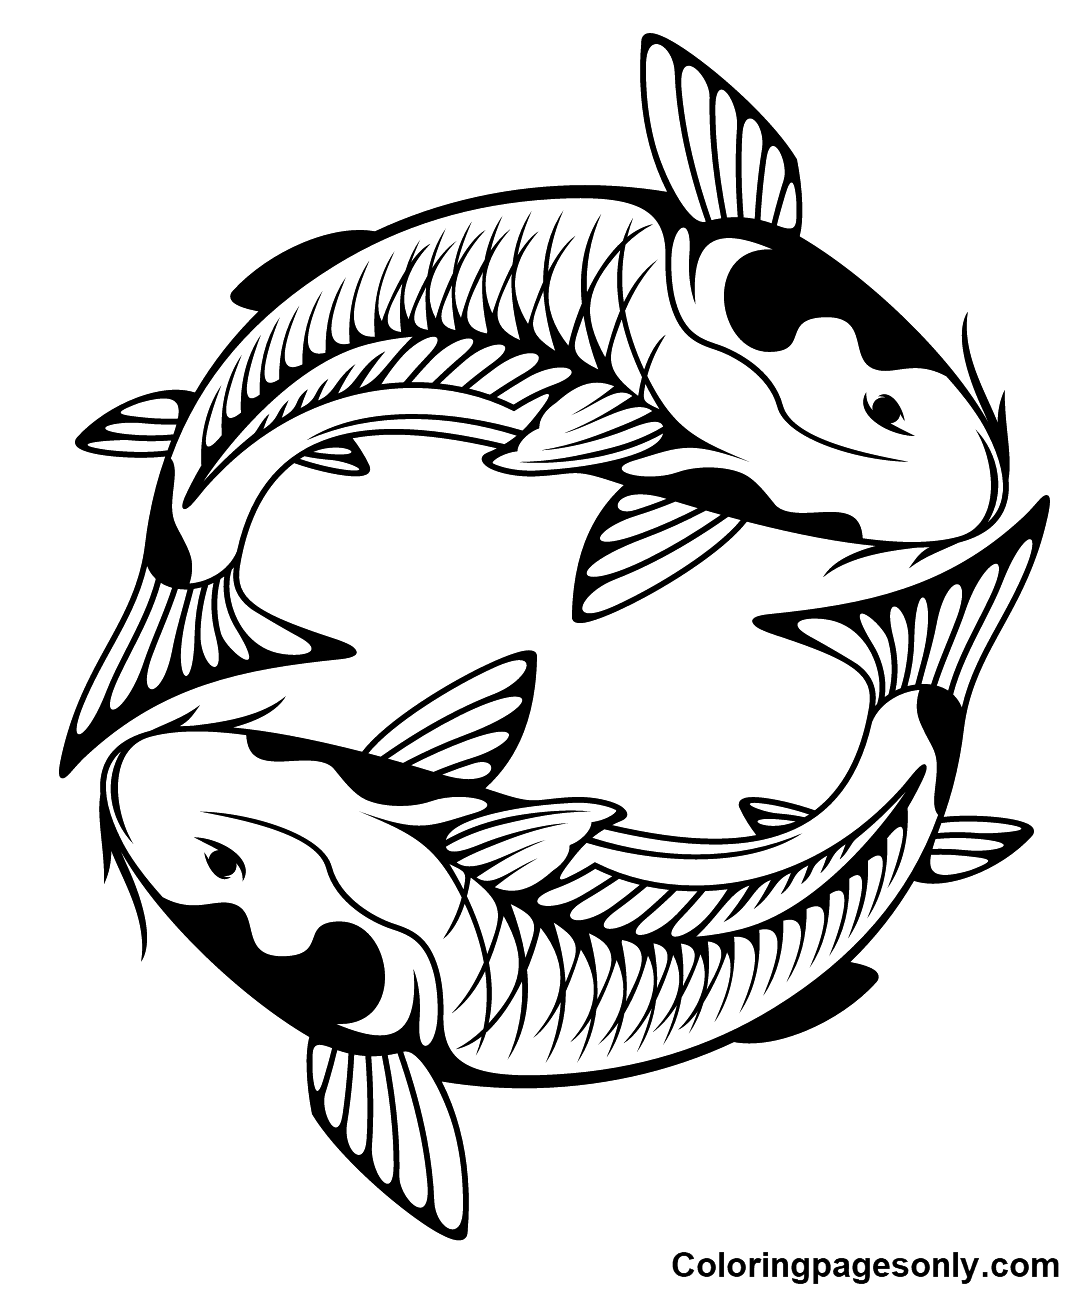 Koi Fish Coloring Pages Printable for Free Download